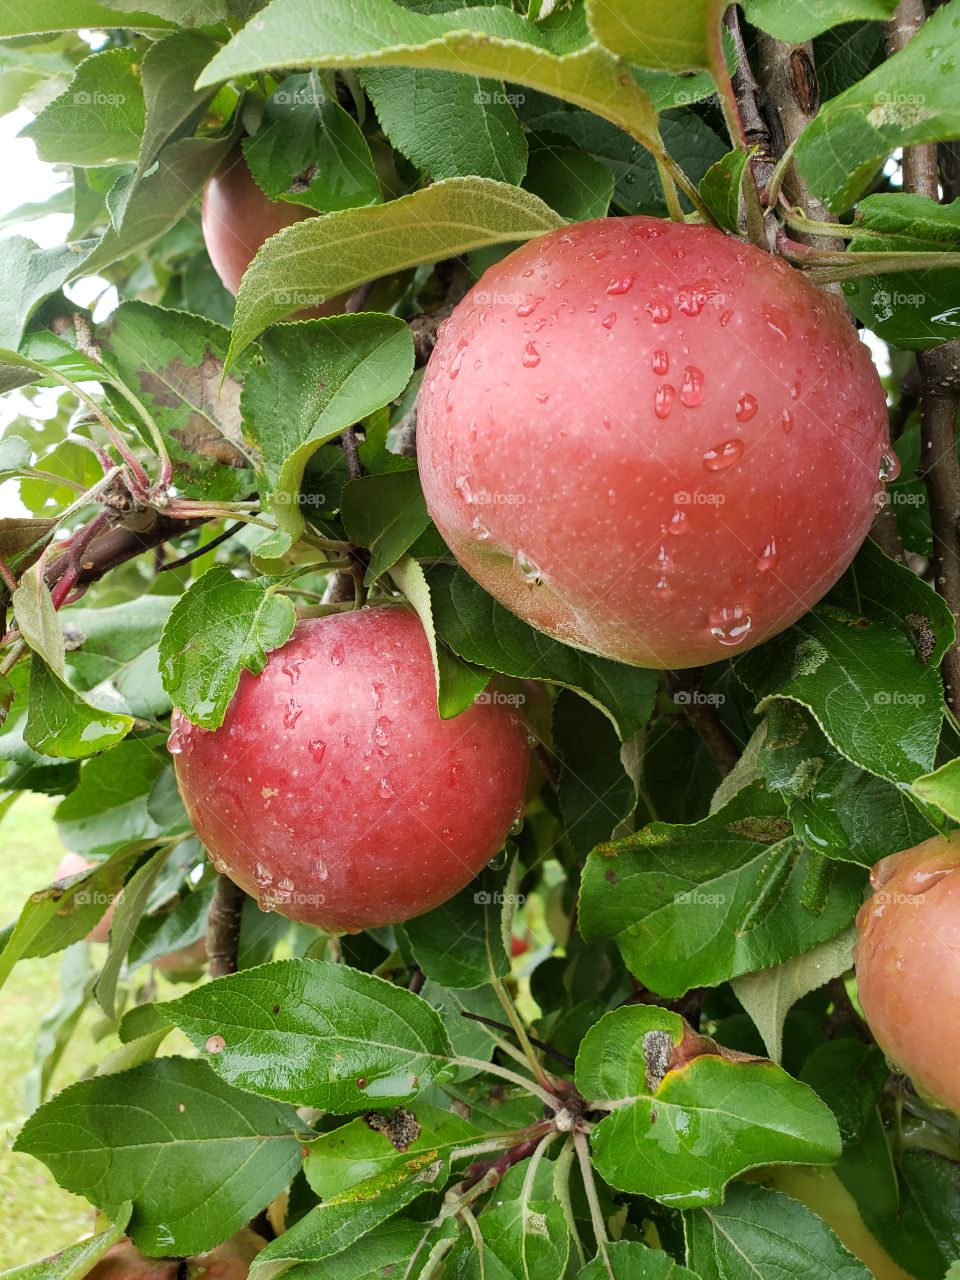 Fresh raindrops on red apples hanging on green tree